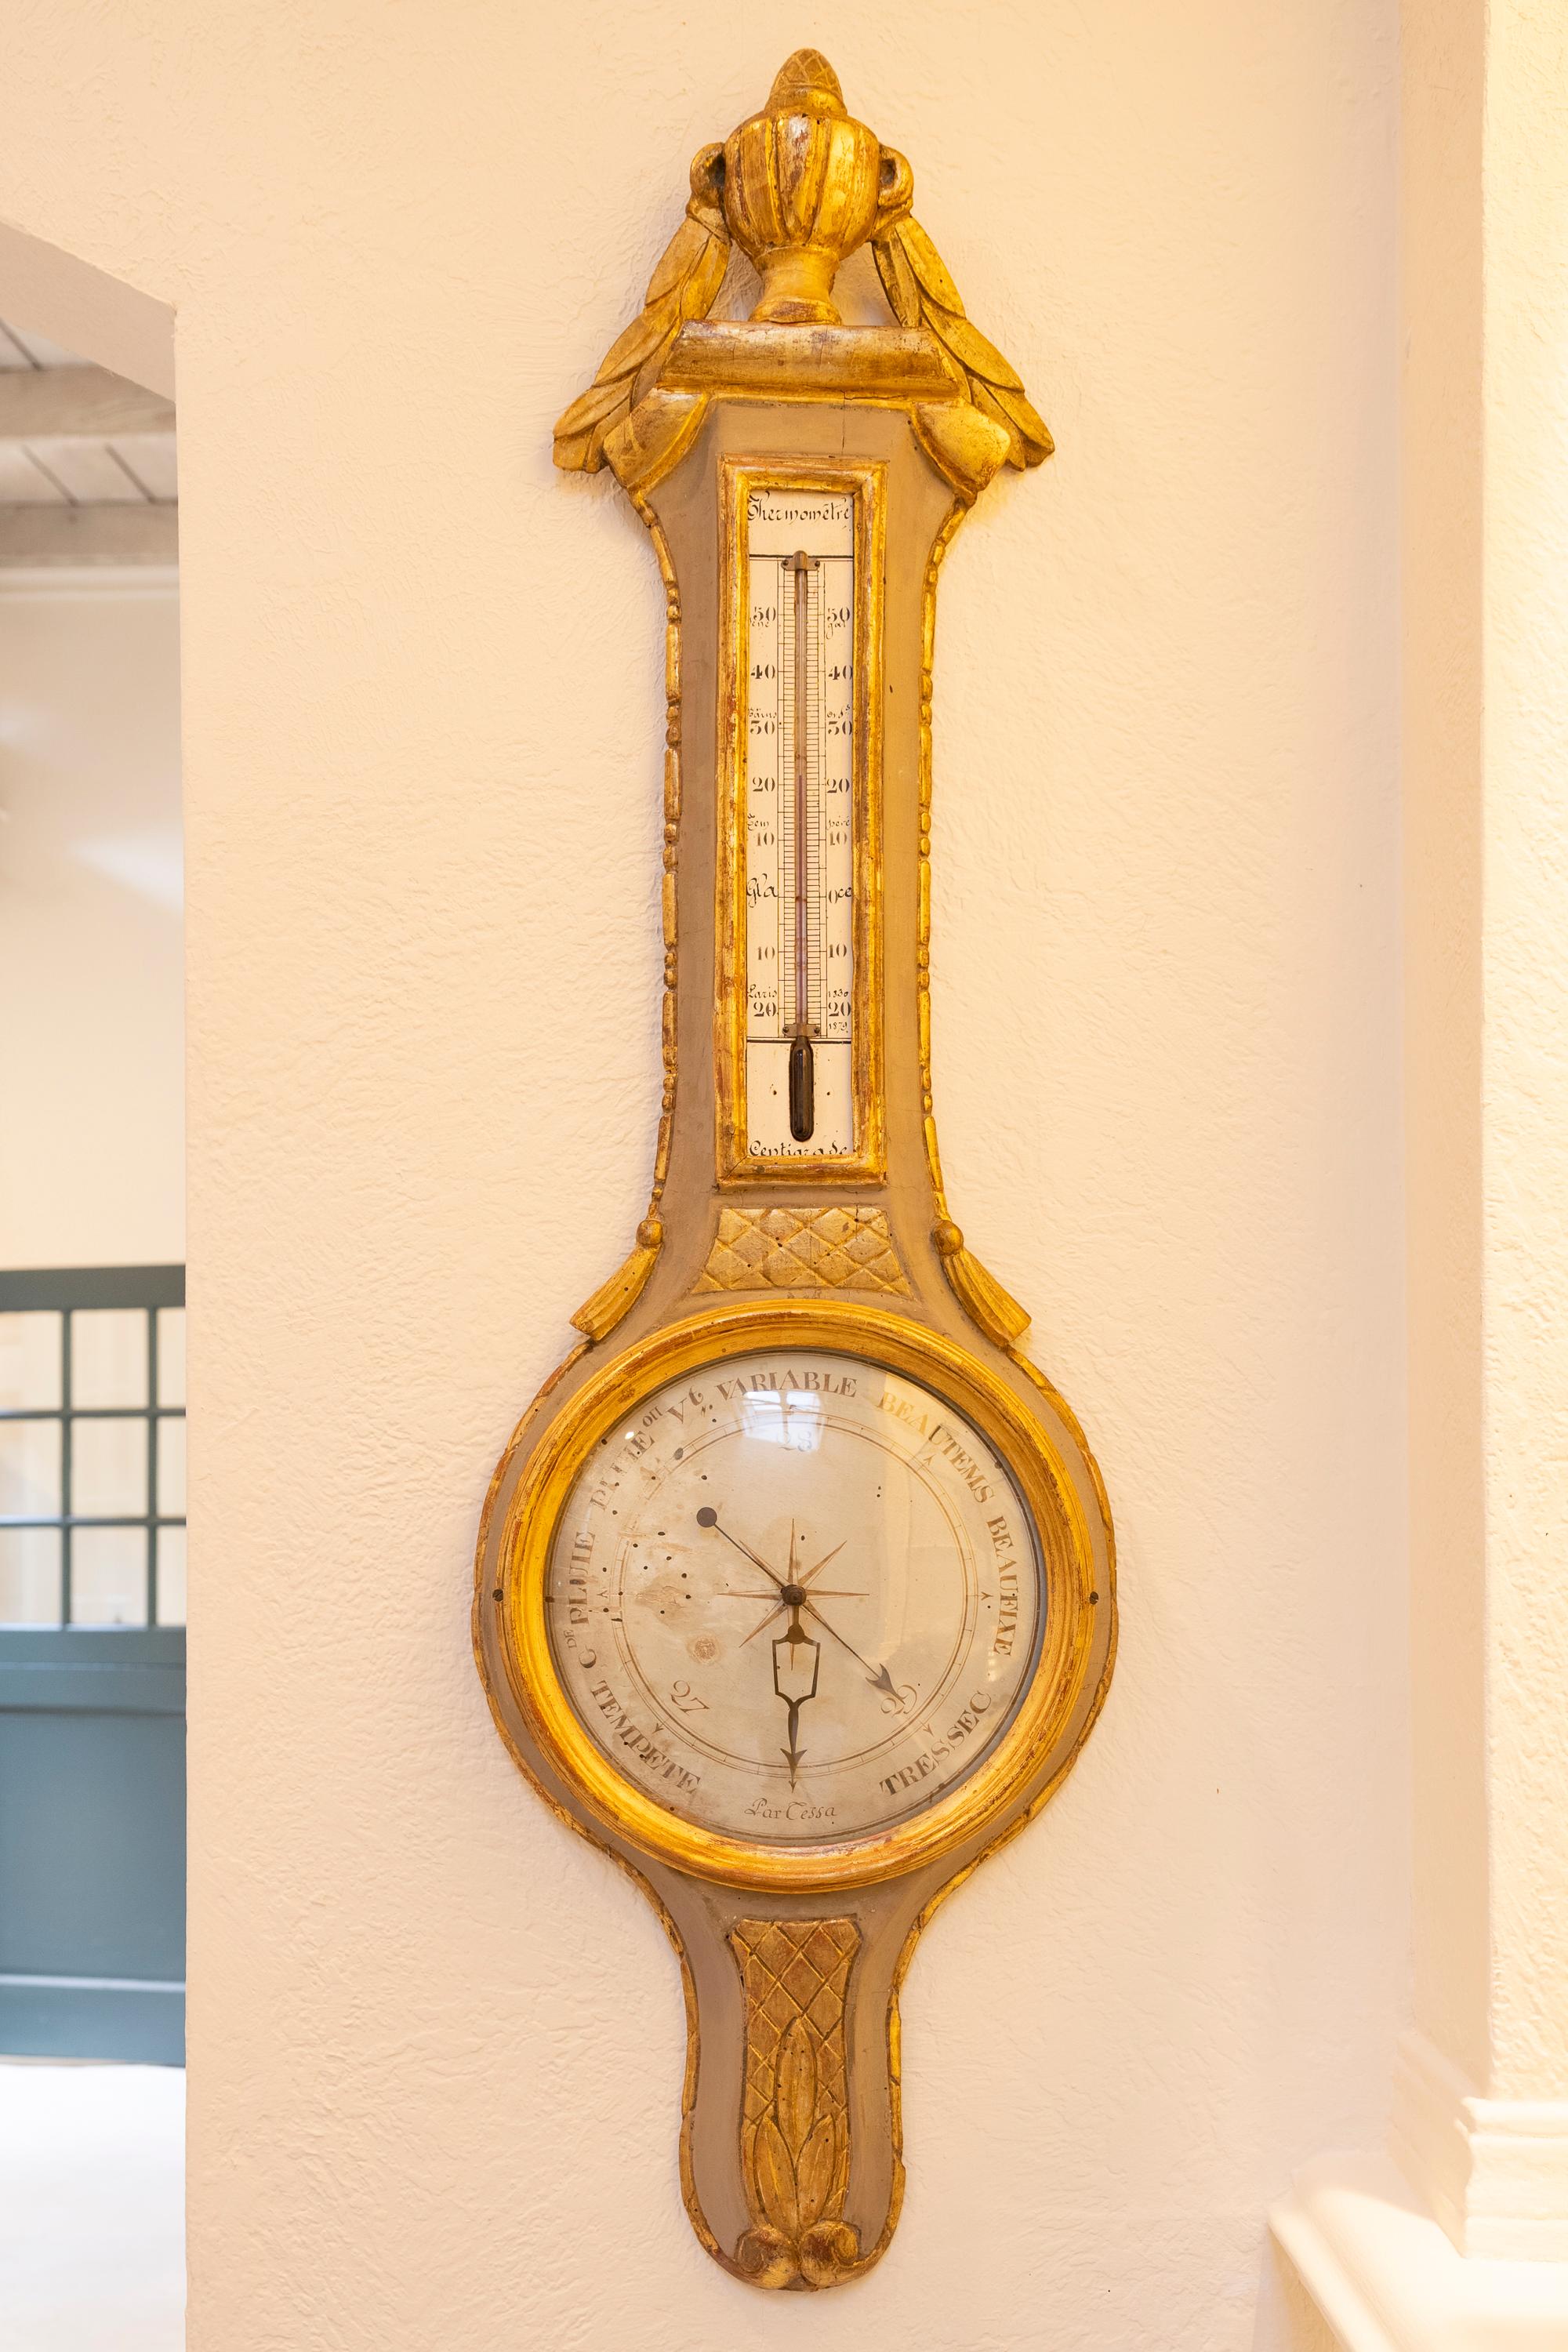 This beautifully carved Louis XVI barometer follows the designs of Evangelista Torricelli, an Italian physicist who was a student of Galileo and who is credited with inventing the first barometer. Acquired from a chateau in the Dordogne valley in